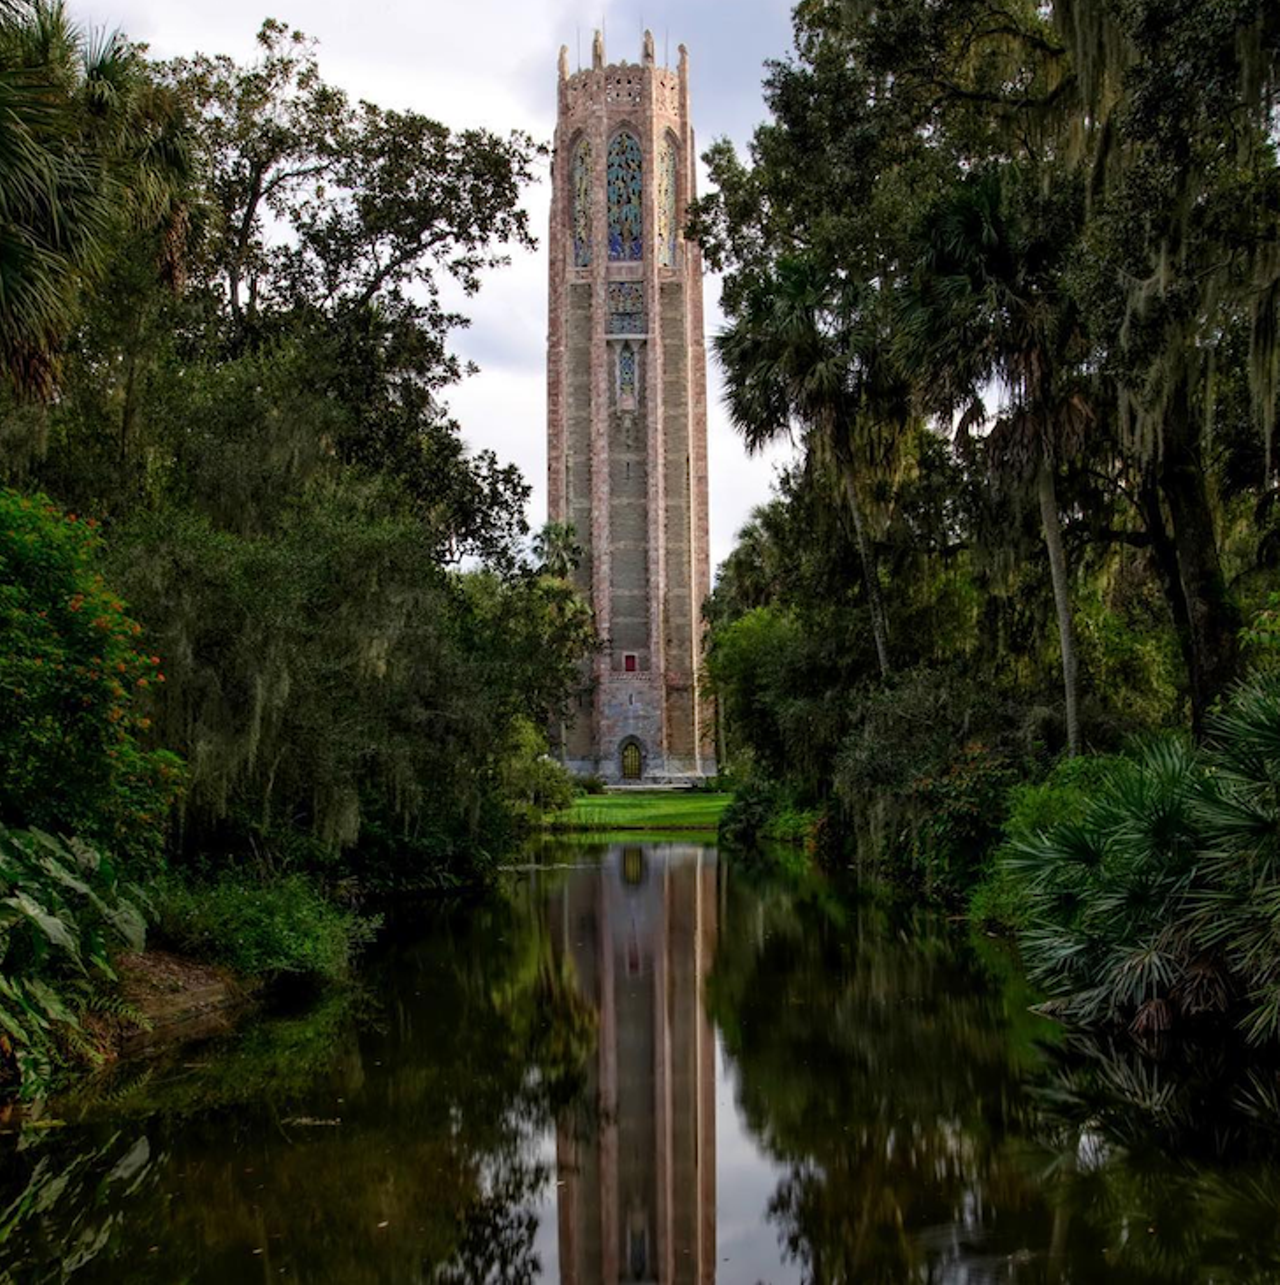 Bok Tower Gardens
1 hour and 13 minutes from Orlando
Things to do: Tucked away in Lake Wales is Bok Tower Gardens, a tower standing since 1929 with a 60-bell carillon whose chiming can be heard every day at 1 p.m. and 3 p.m. Inside there are eight levels full of history on how the tower came to be and a room where bells can be viewed, as well as access to the top. The tower is surrounded by beautiful gardens which house endangered plants, pollinating plants and gorgeous landscapes. There are also two trails which are going to leave you wanting to come back.
Photo via pixl8ted1/ Instagram